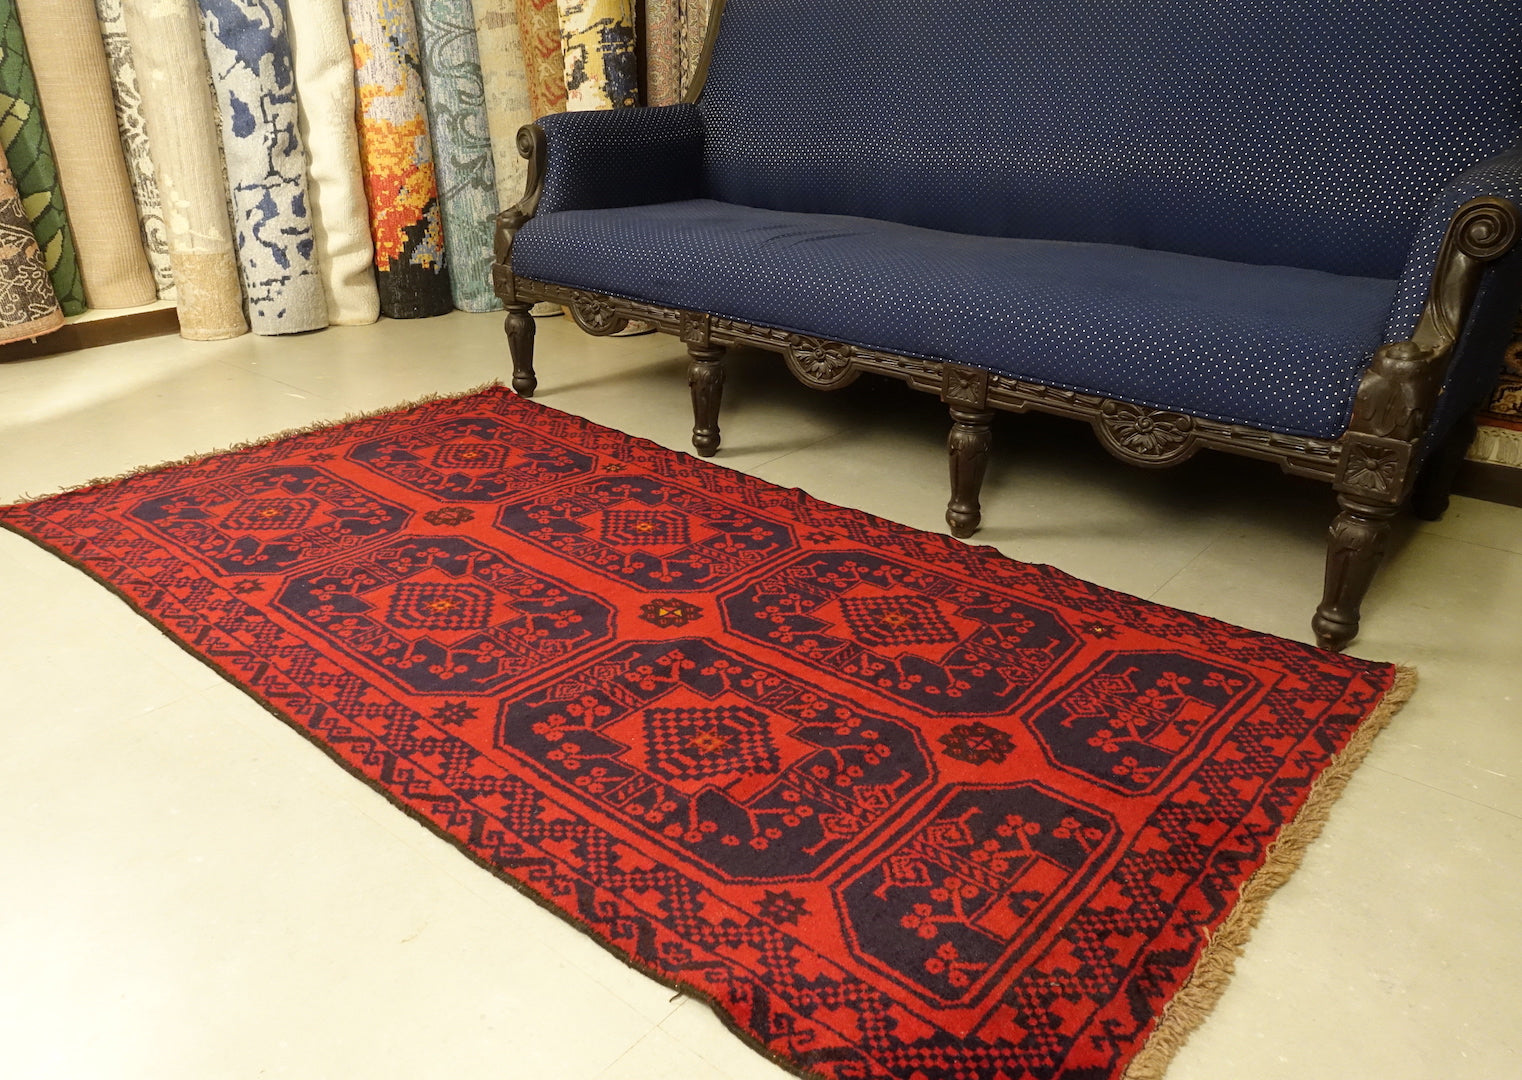 A 3.5 feet by 6.5 feet turkoman wool rug. The colours used are deep red and dark blue.